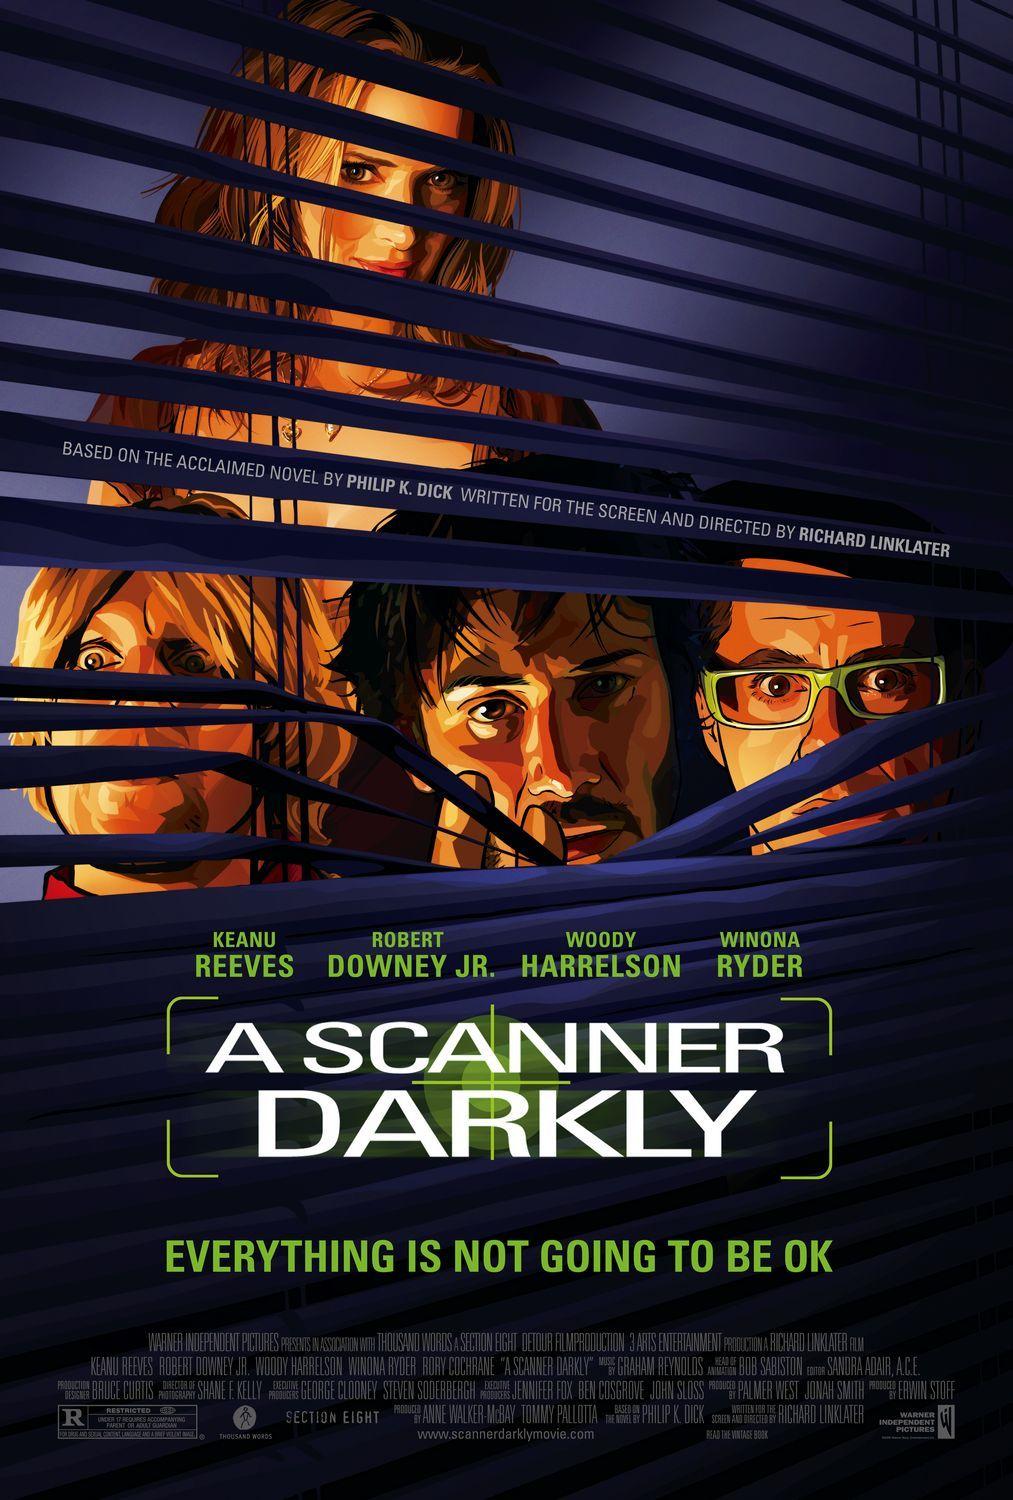 Movie Posters.2038.net. Posters for movie.php?id=1273: A Scanner